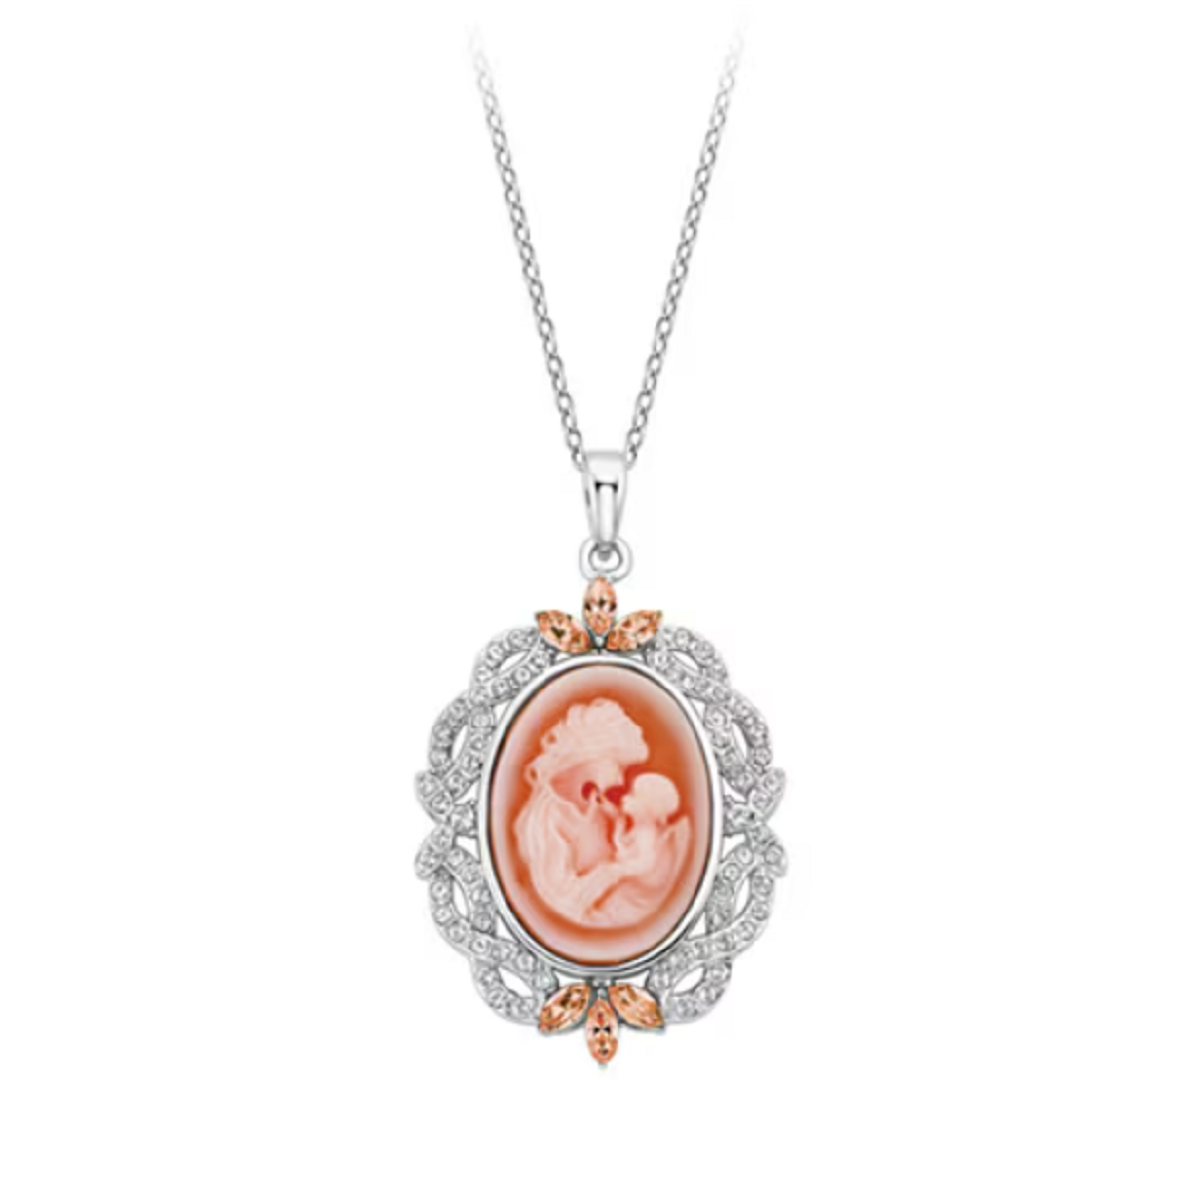 Meaningful Gifts for Mom from Daughter – Crystal Mother & Child Cameo Pendant in Sterling Silver